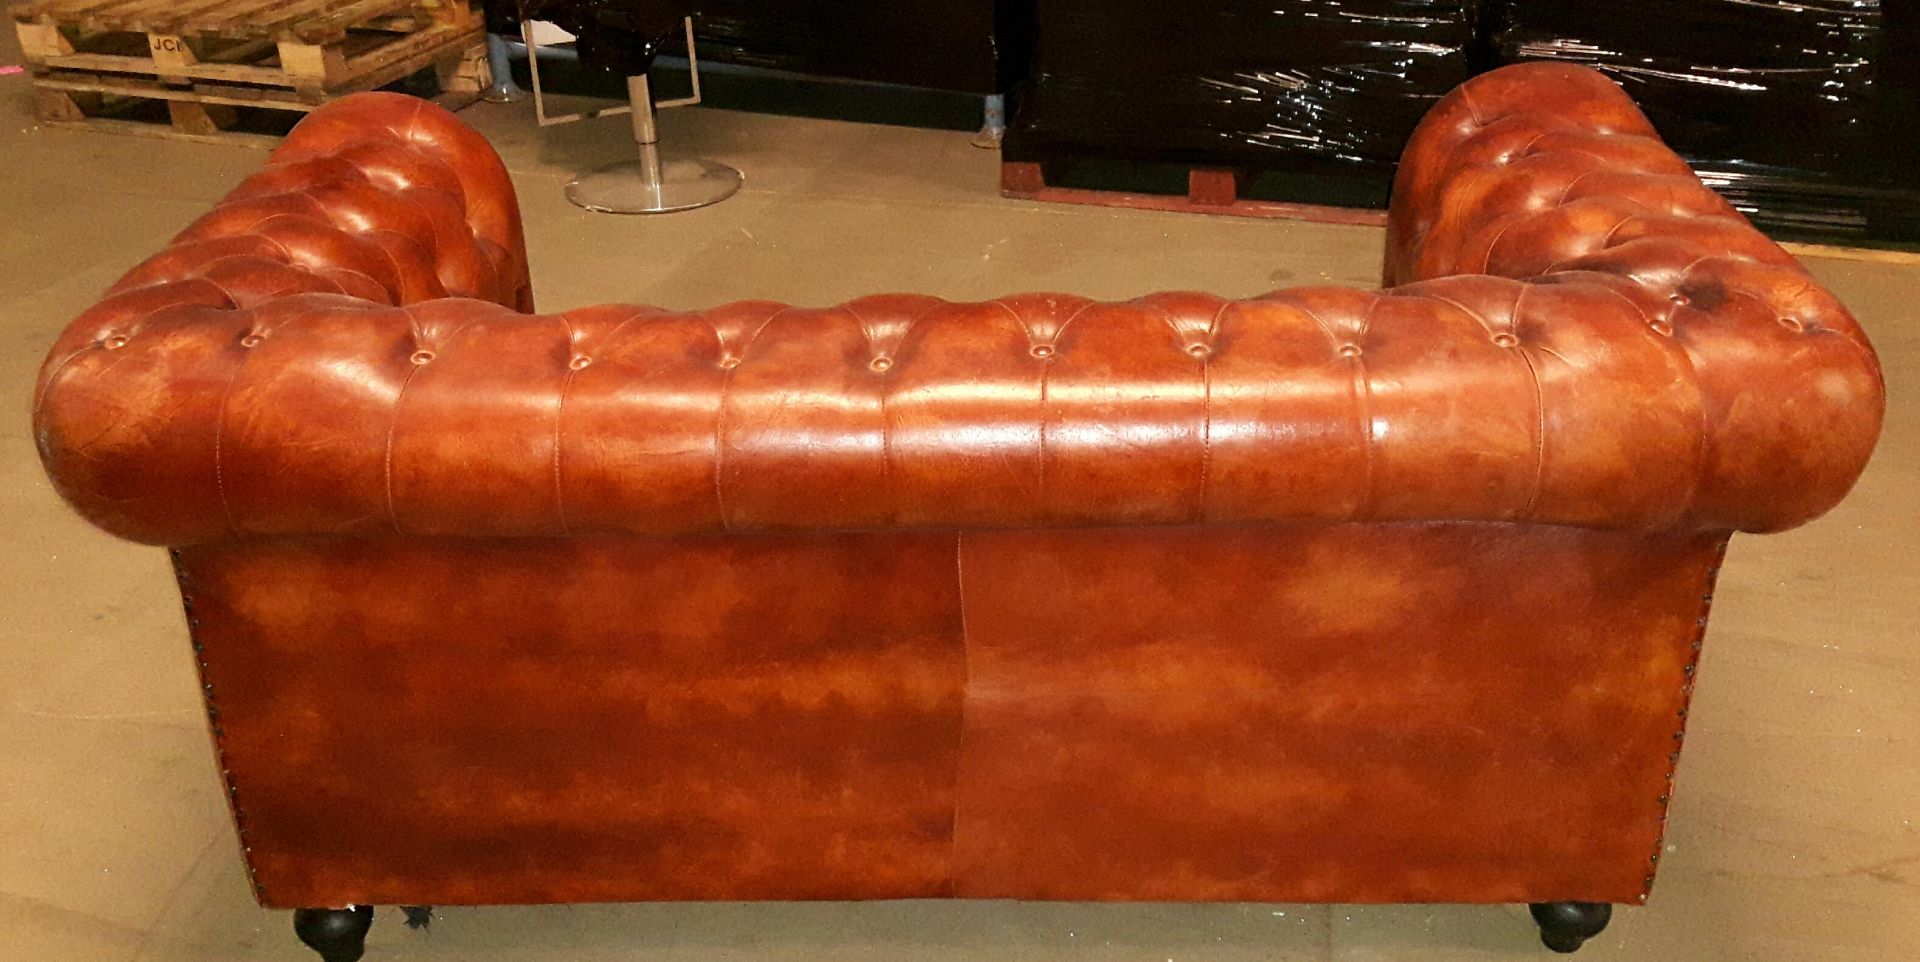 Retro style Leather 2 seater Chesterfield Sofa in BrownÊ - Image 4 of 4